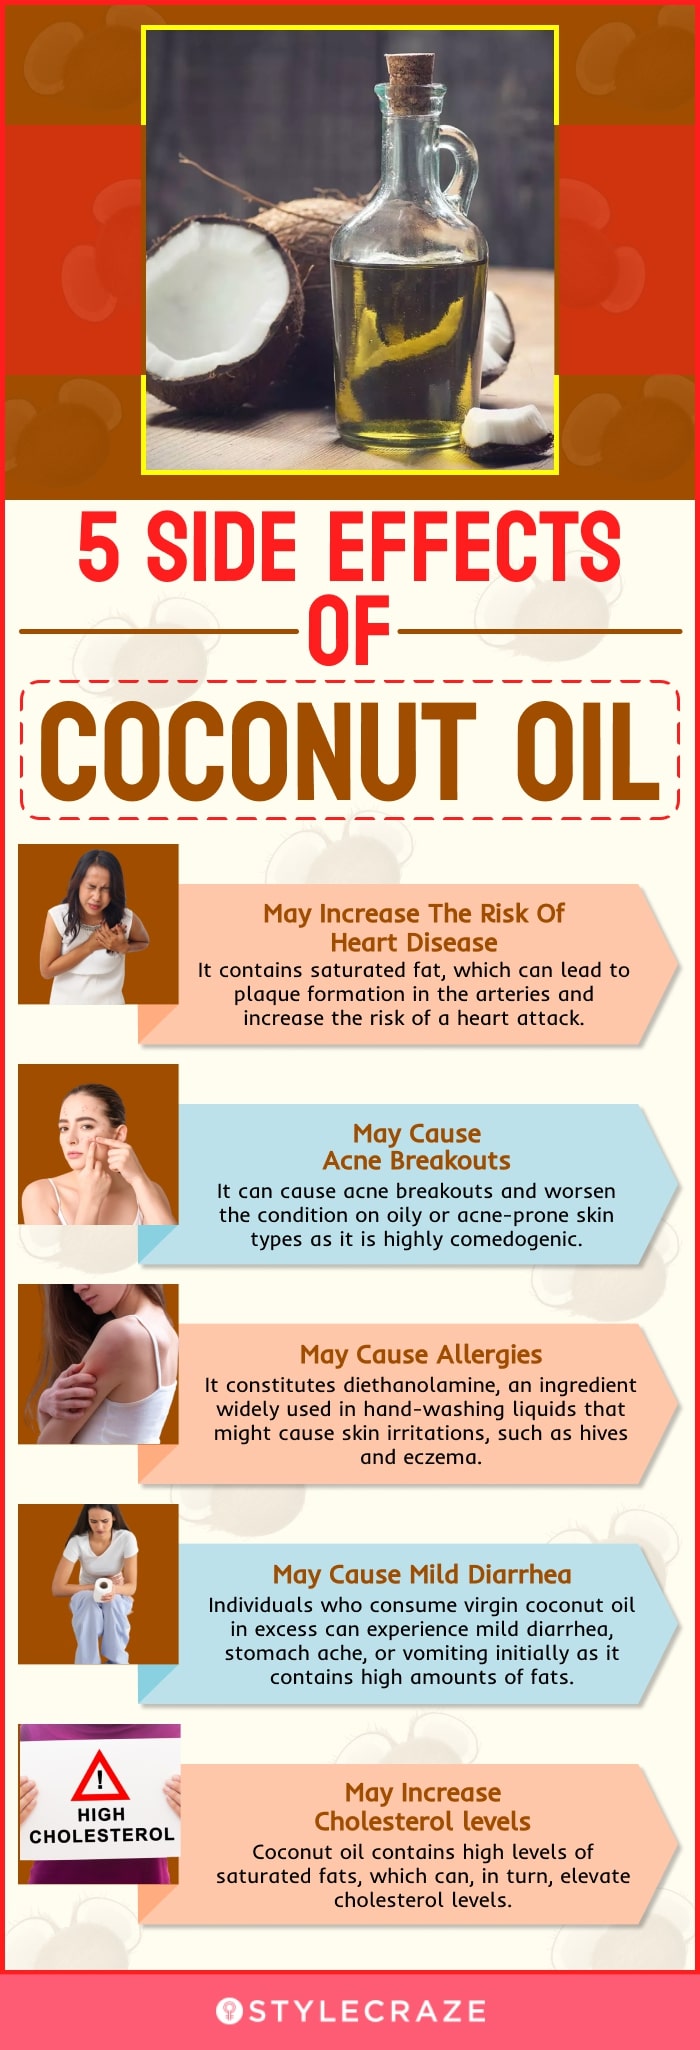 5 side effects of coconut oil (infographic)